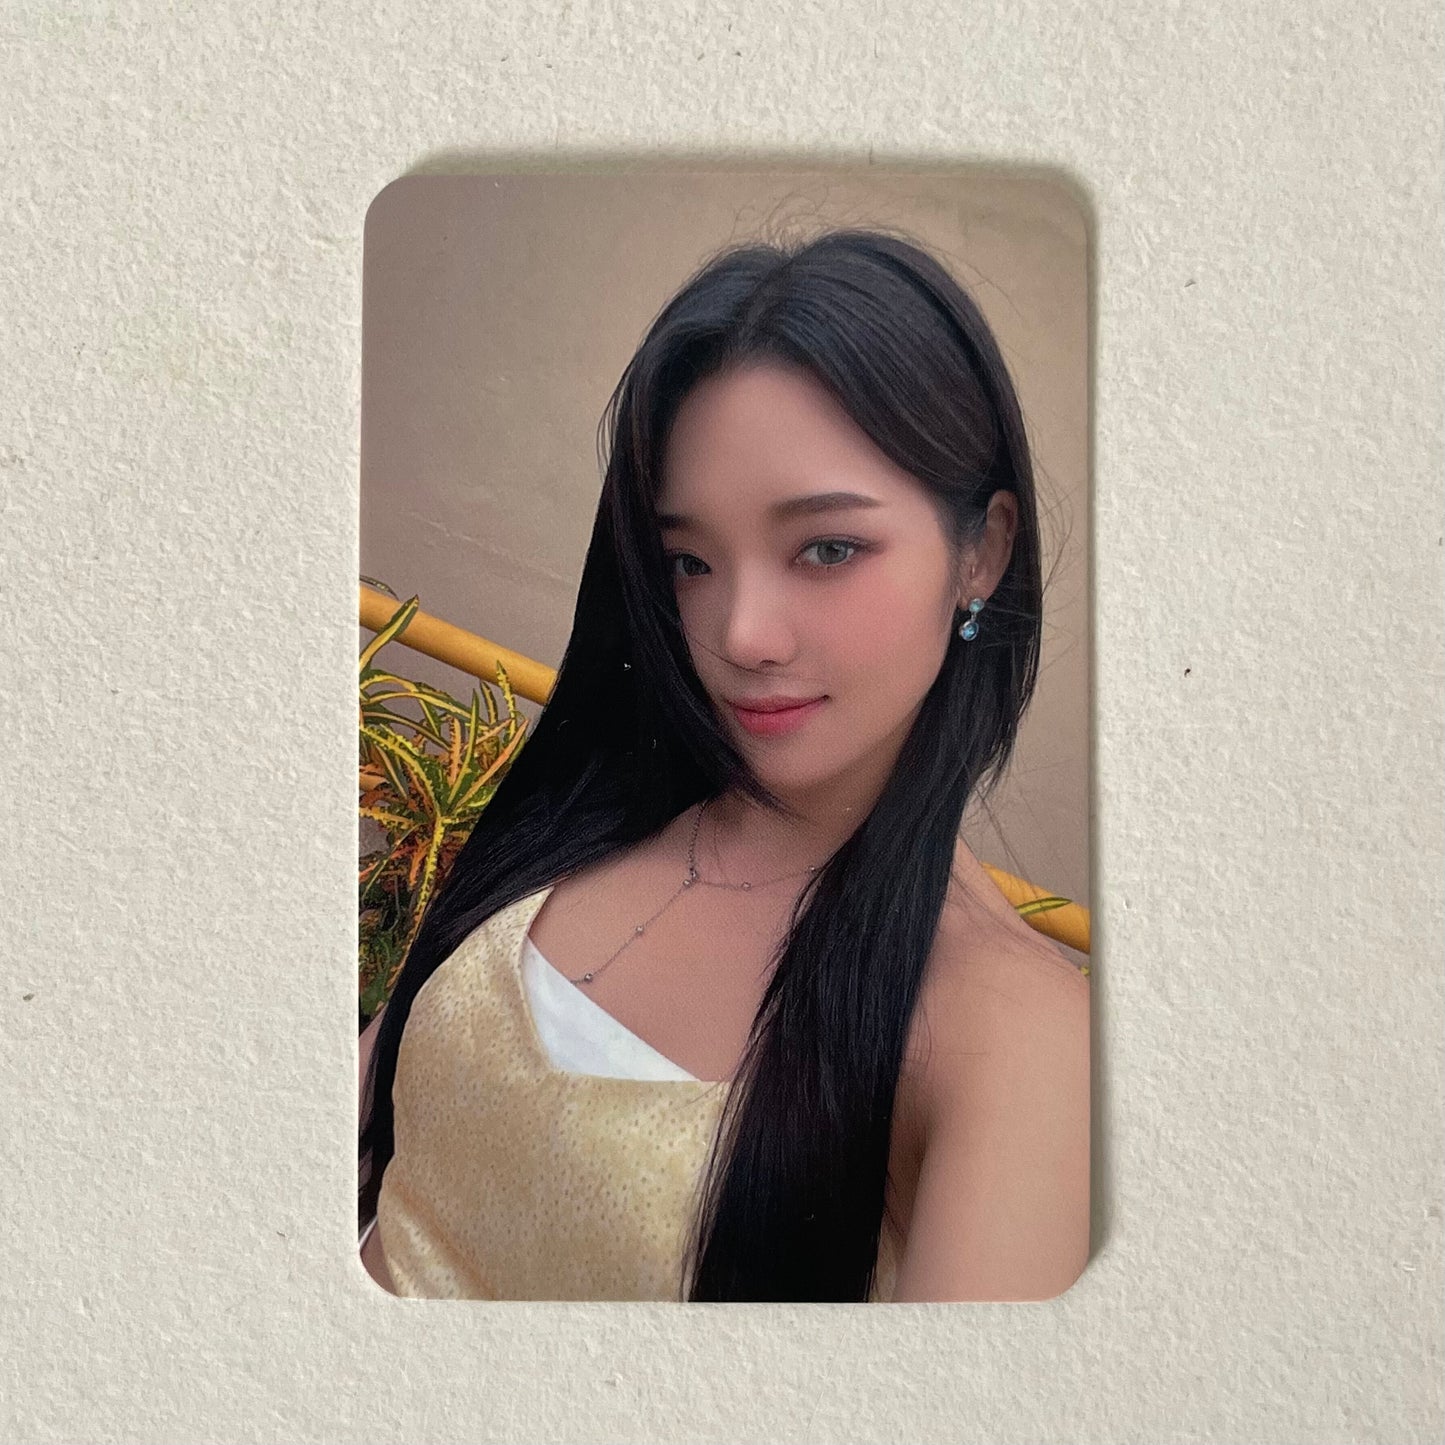 FROMIS_9 - FROM OUR MEMENTO BOX, MusicKorea POBs